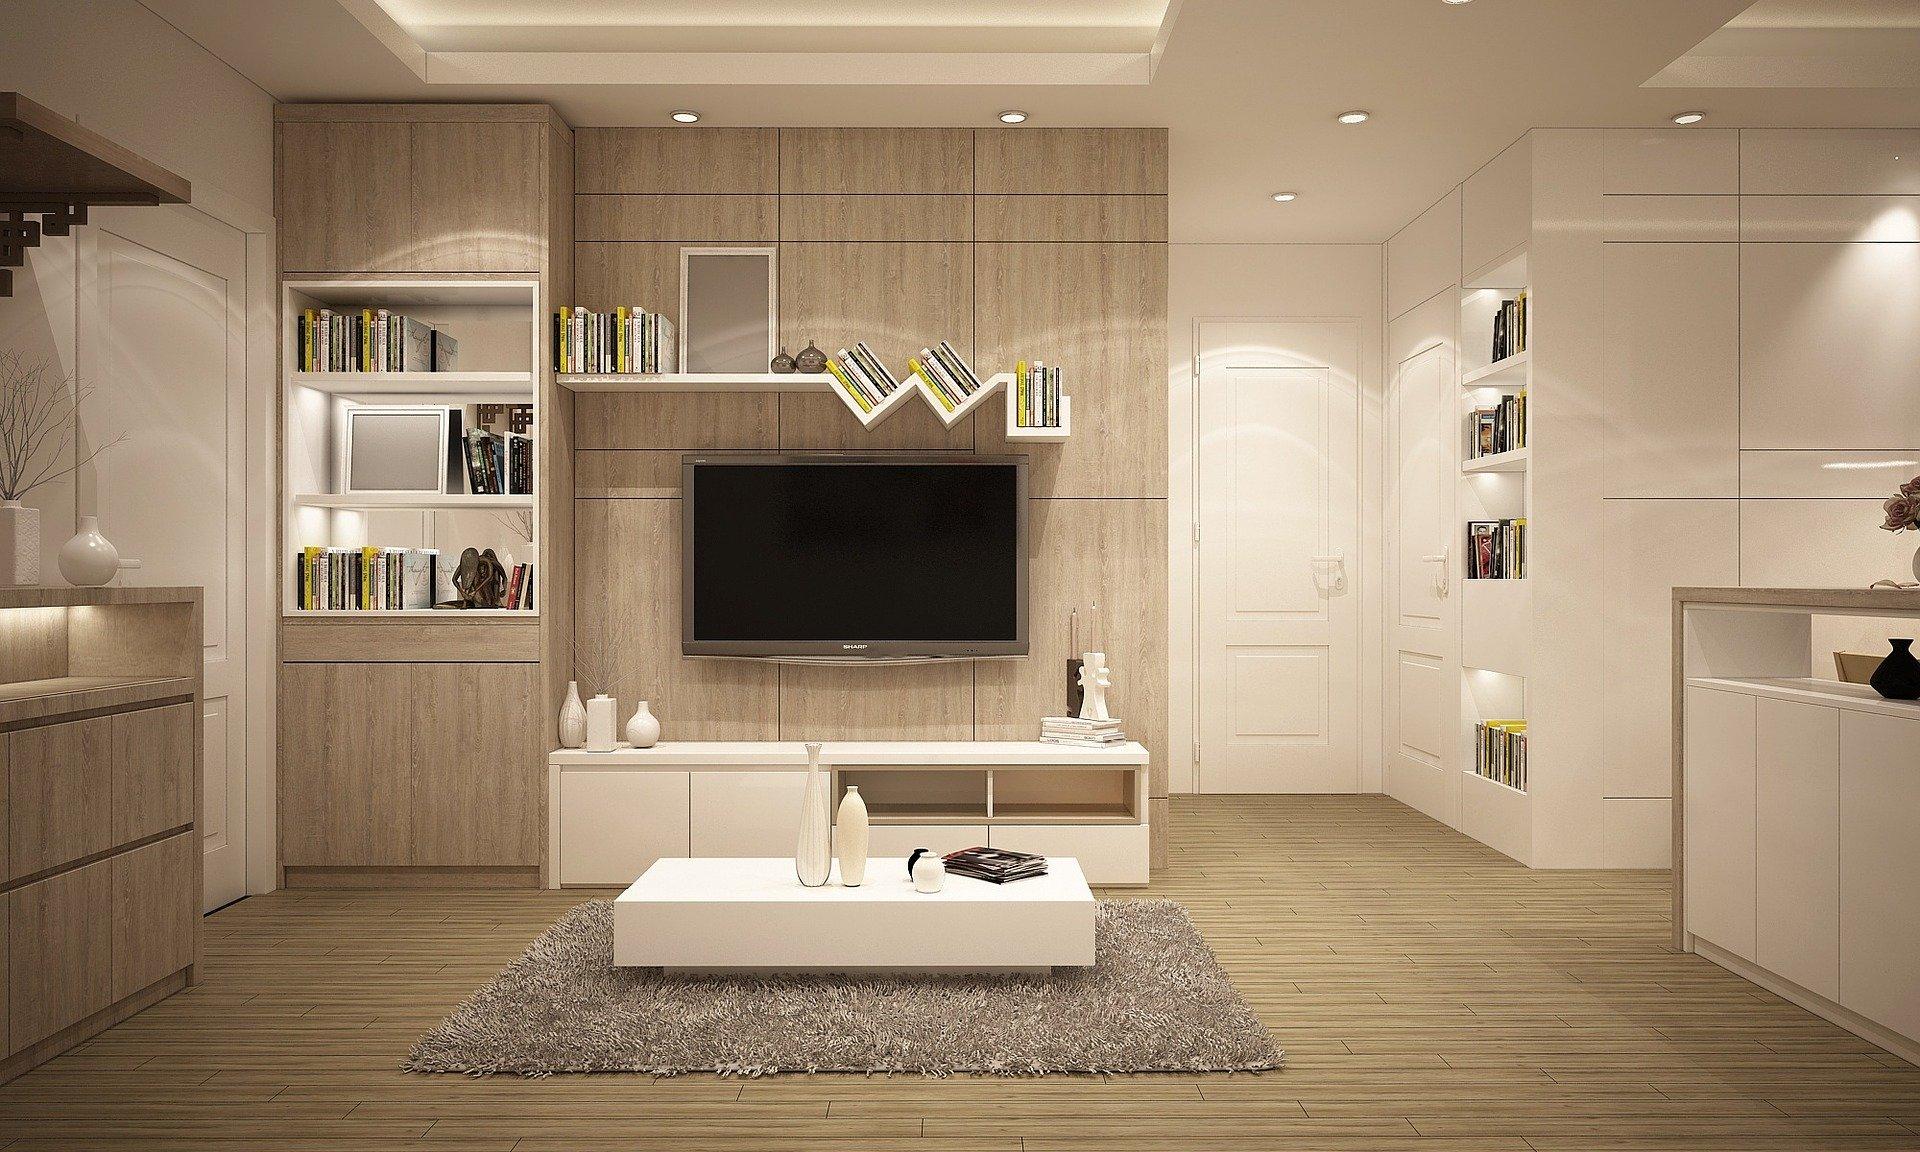 living room with tv